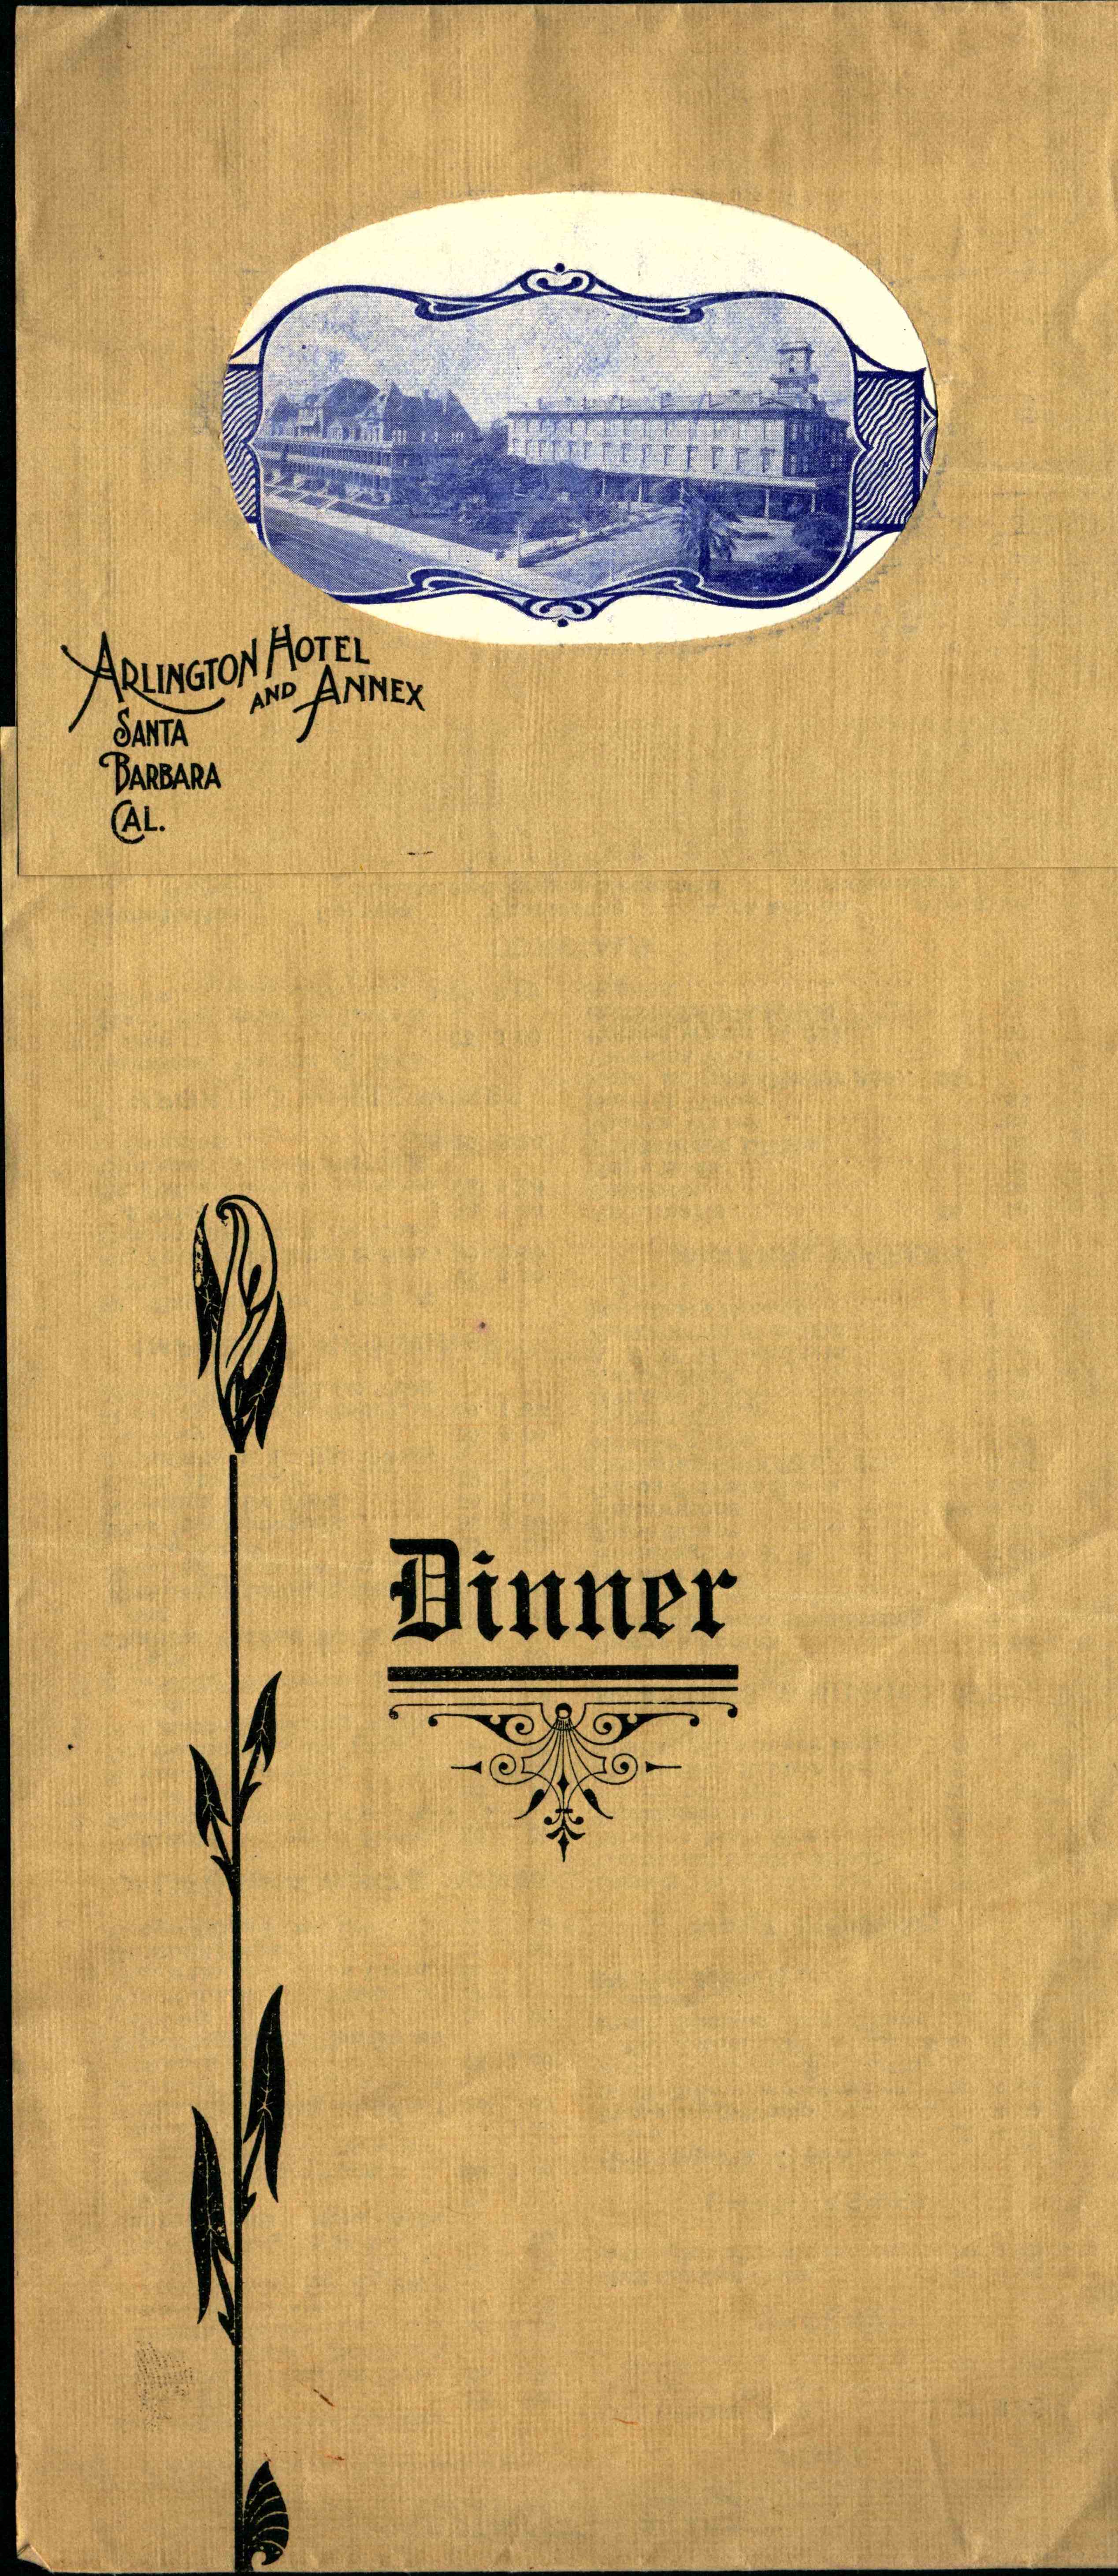 A picture of the hotel on the dinner menu